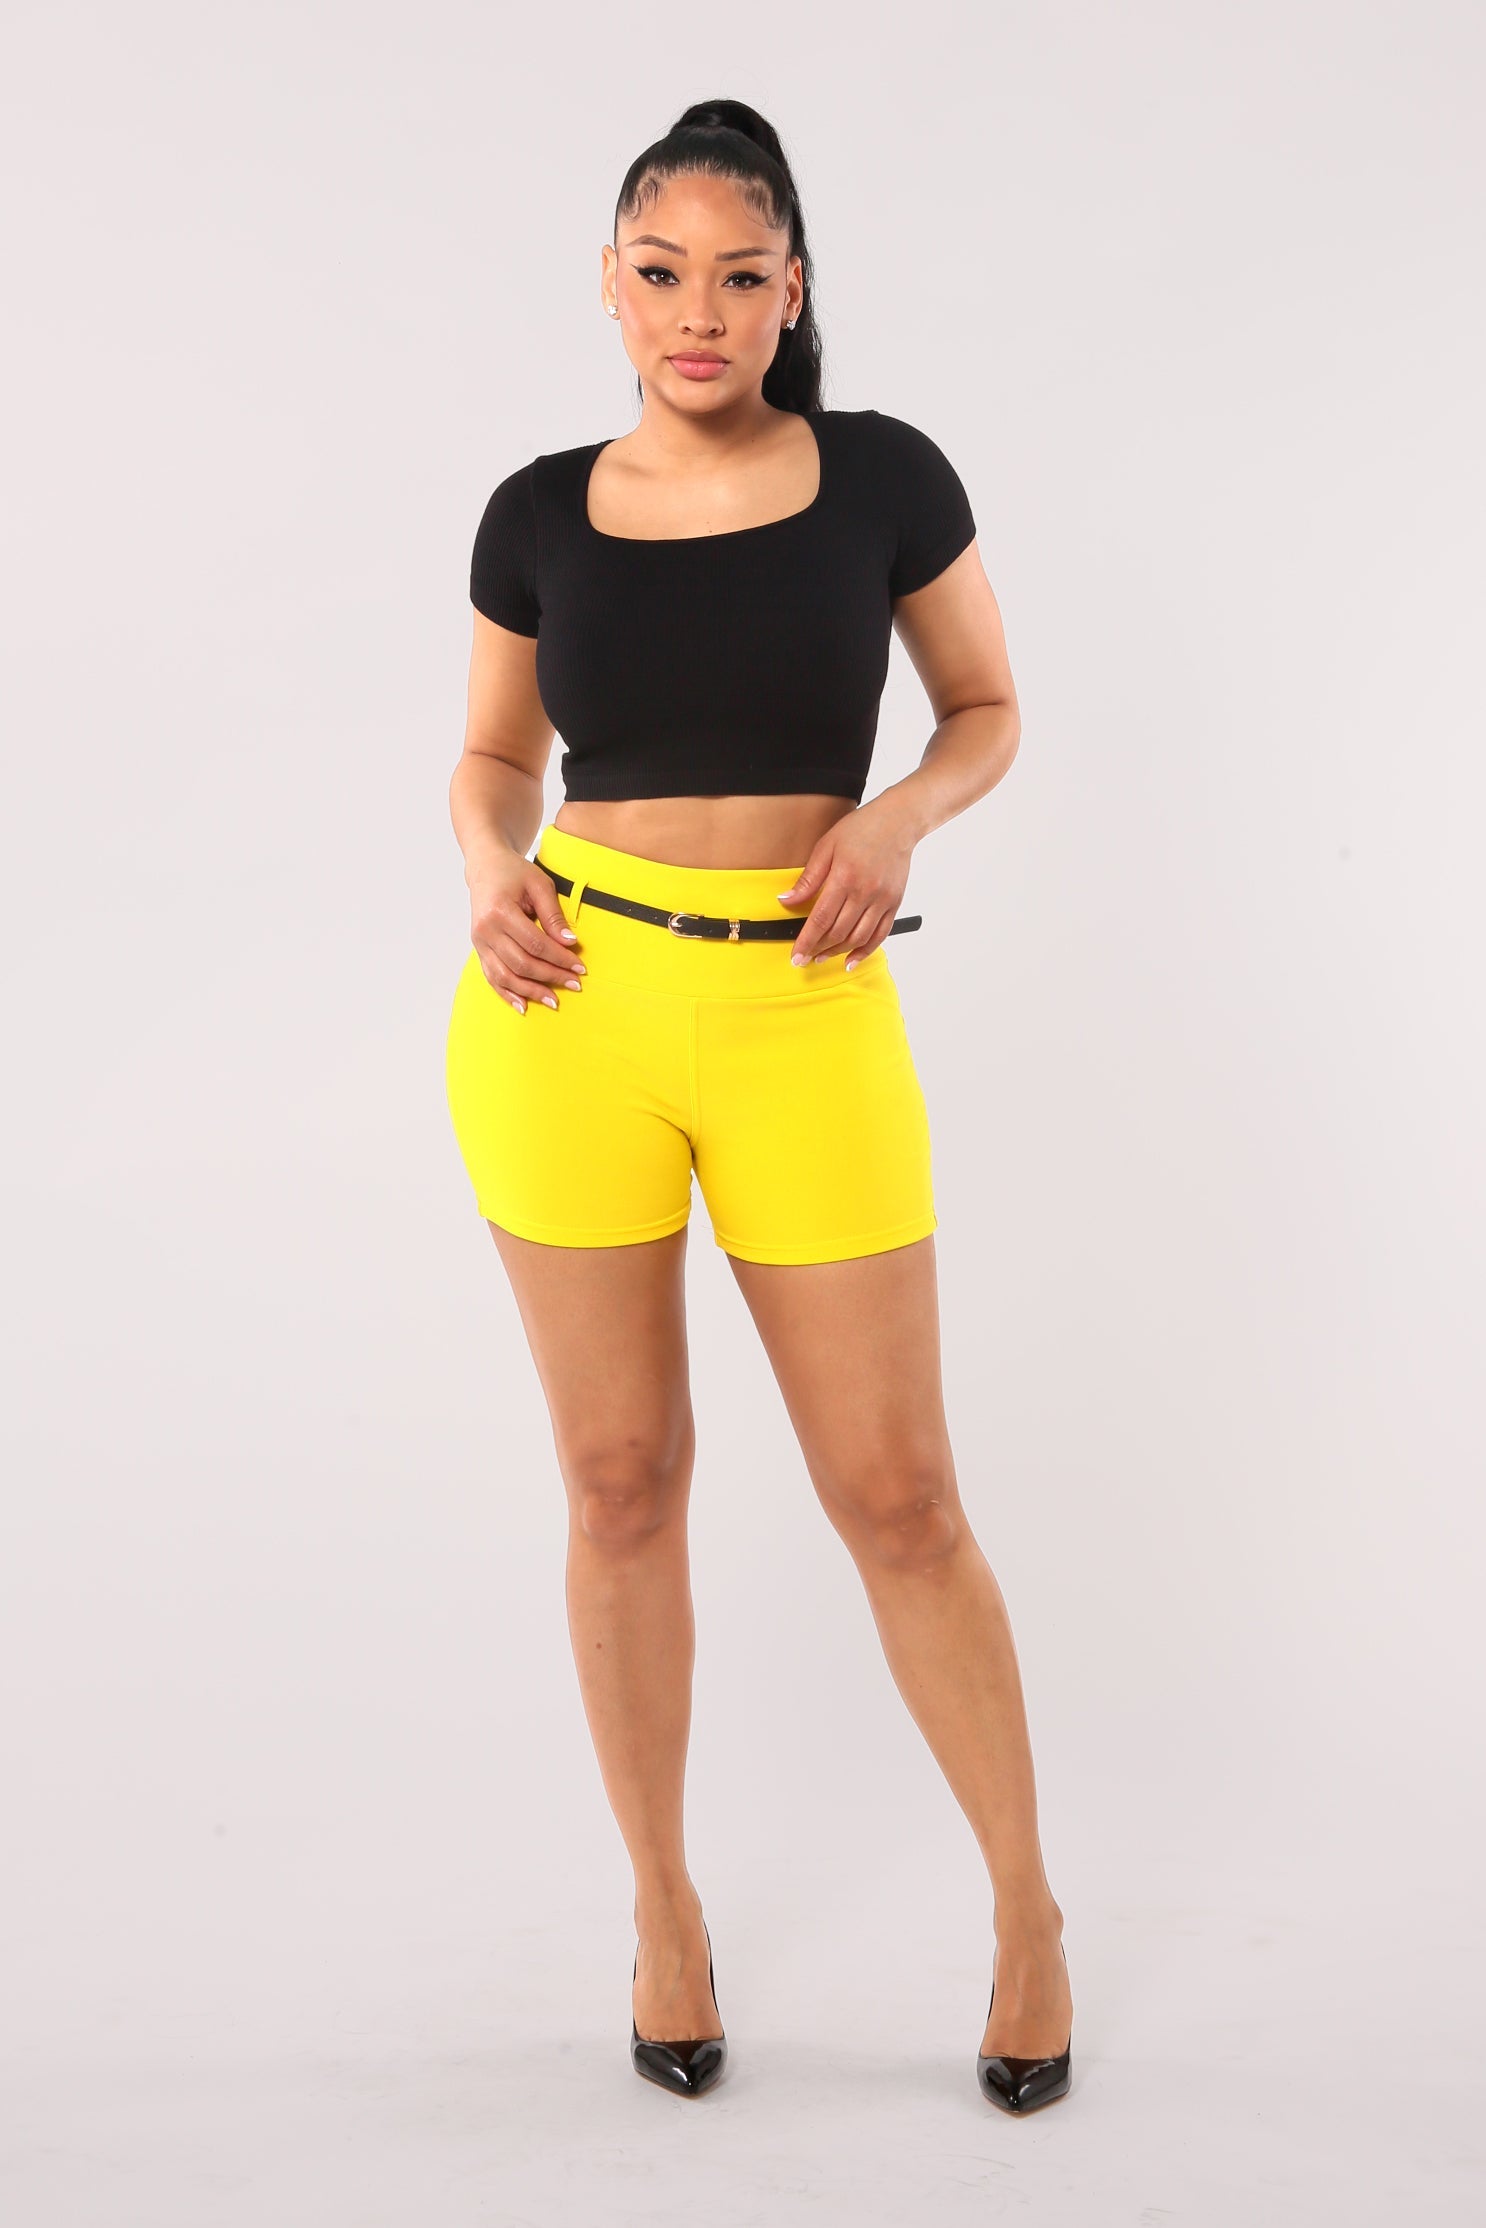 High Waist Sculpting Shorts With Faux Leather Belt - Yellow - SHOSHO Fashion